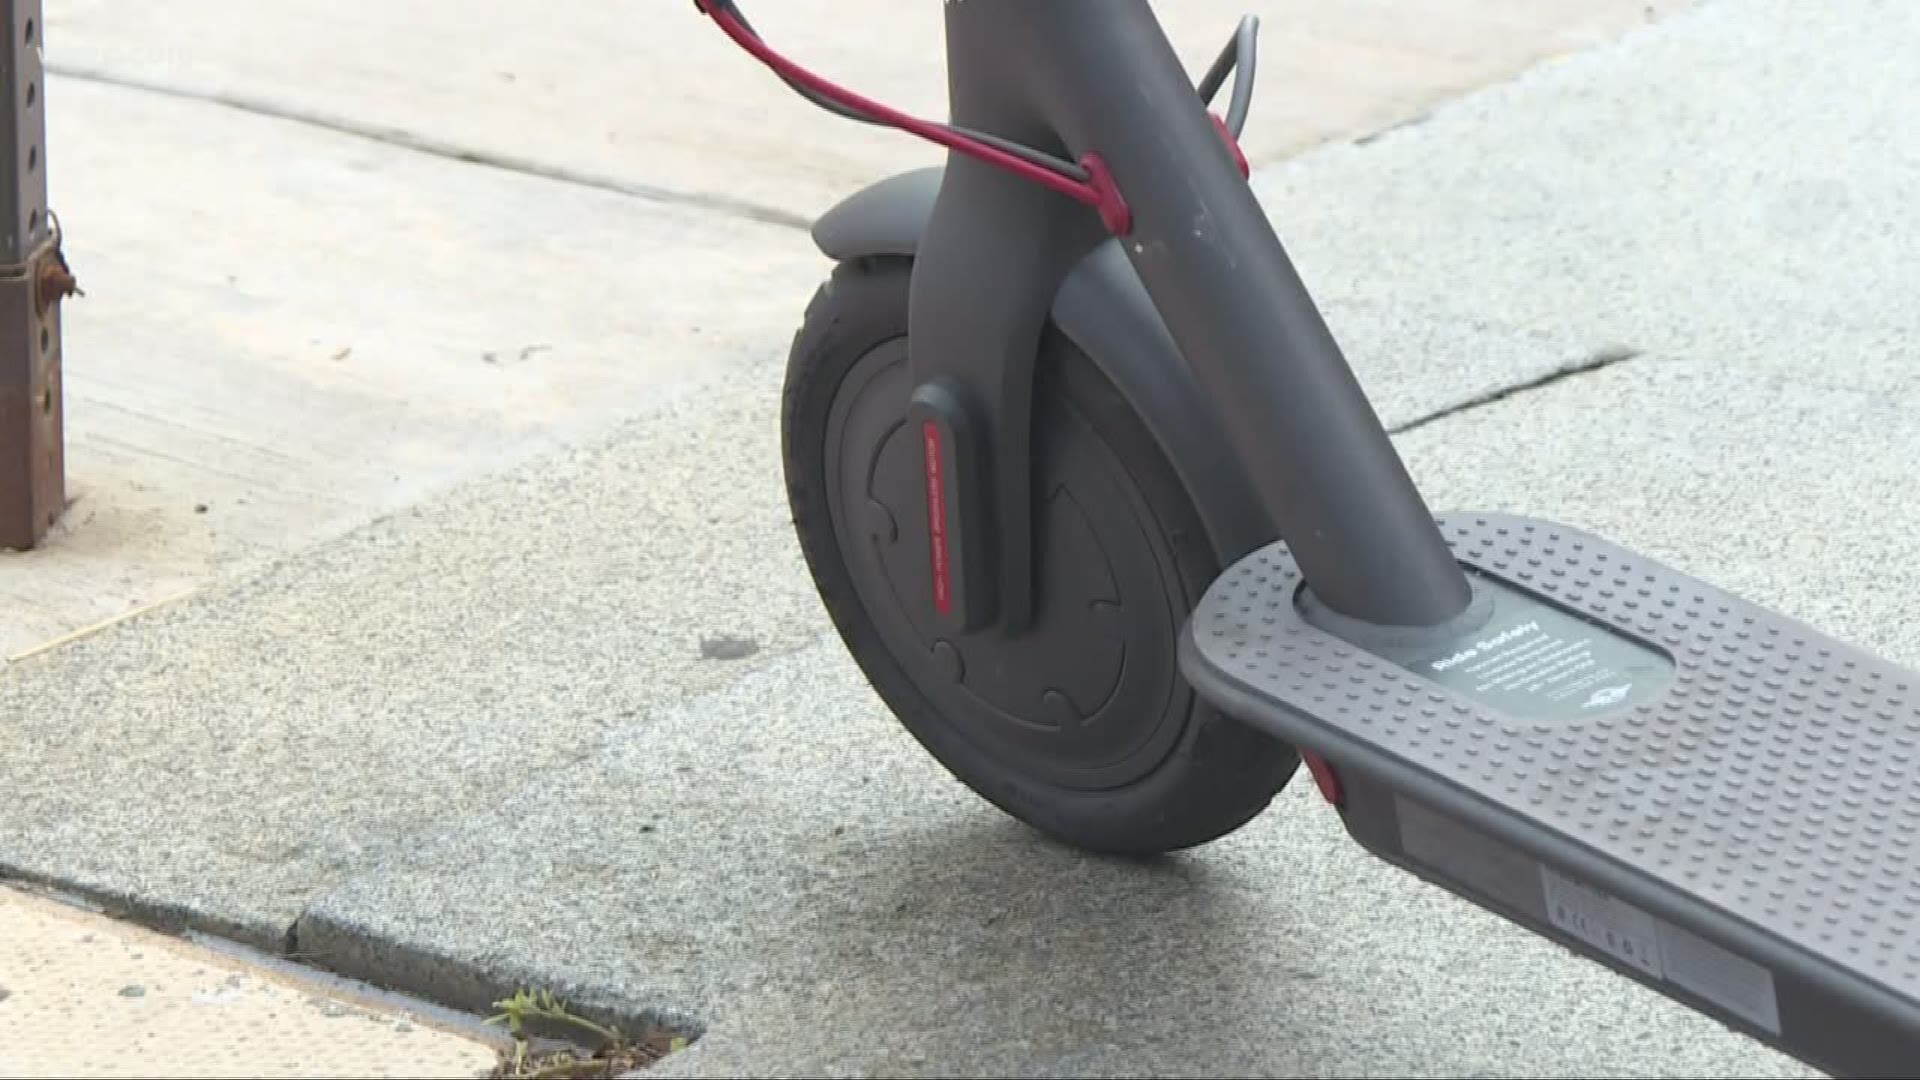 Do you want e-scooters in your neighborhood? A group of suburbs wants to know what you think in a survey.